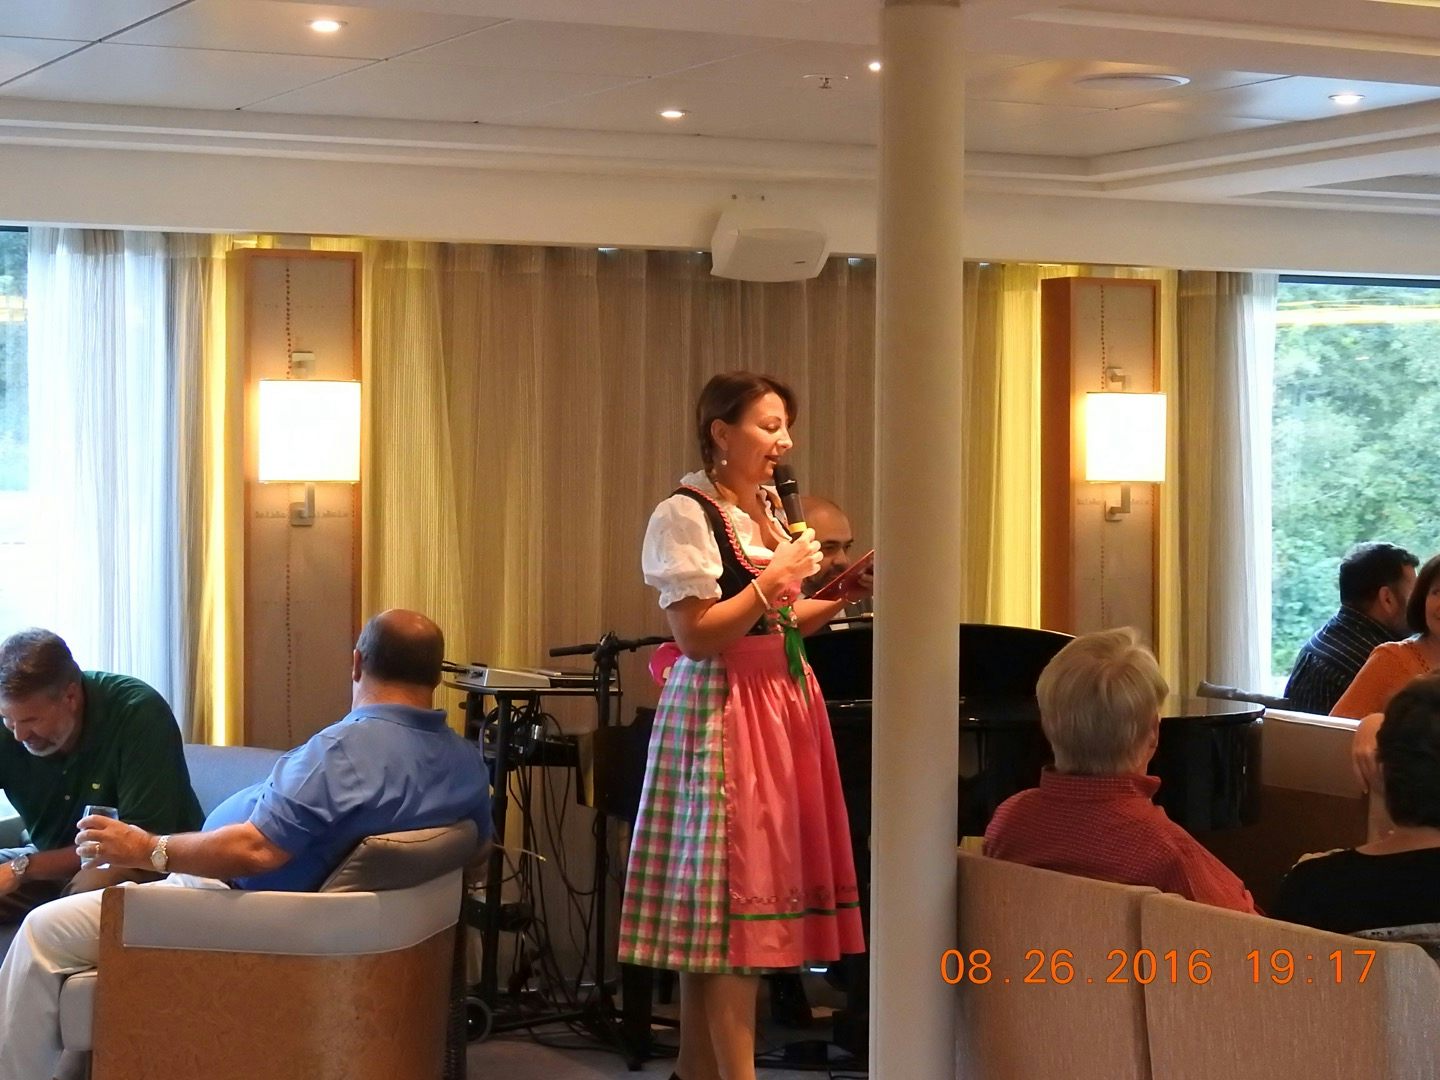 Daily update from the cruise director, dressed in her dirndl as we prepare